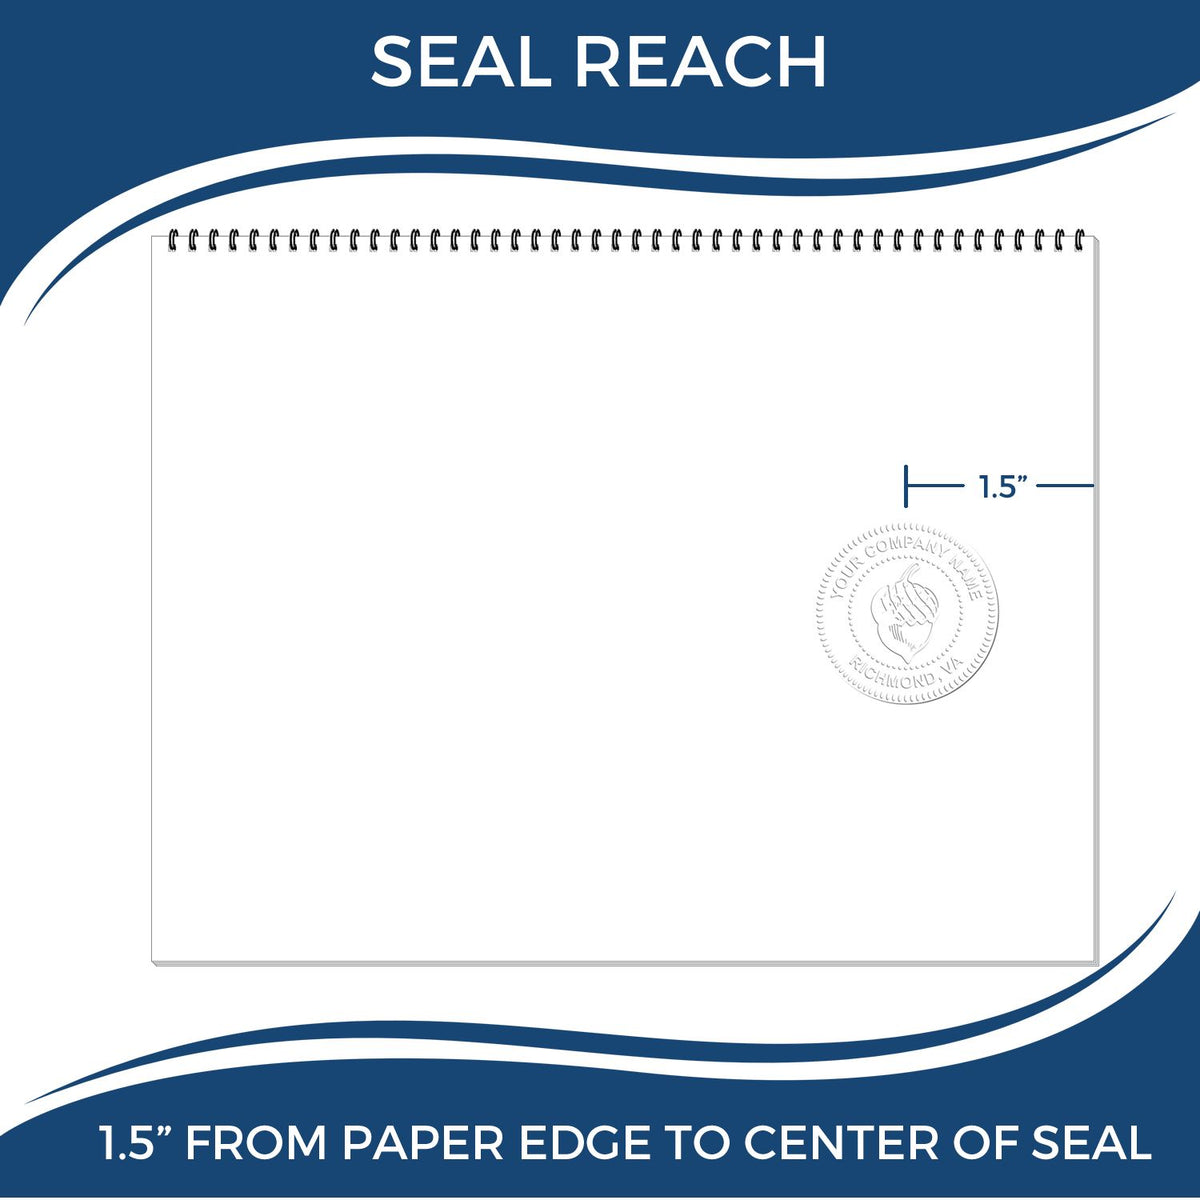 An infographic showing the seal reach which is represented by a ruler and a miniature seal image of the Alaska Desk Surveyor Seal Embosser